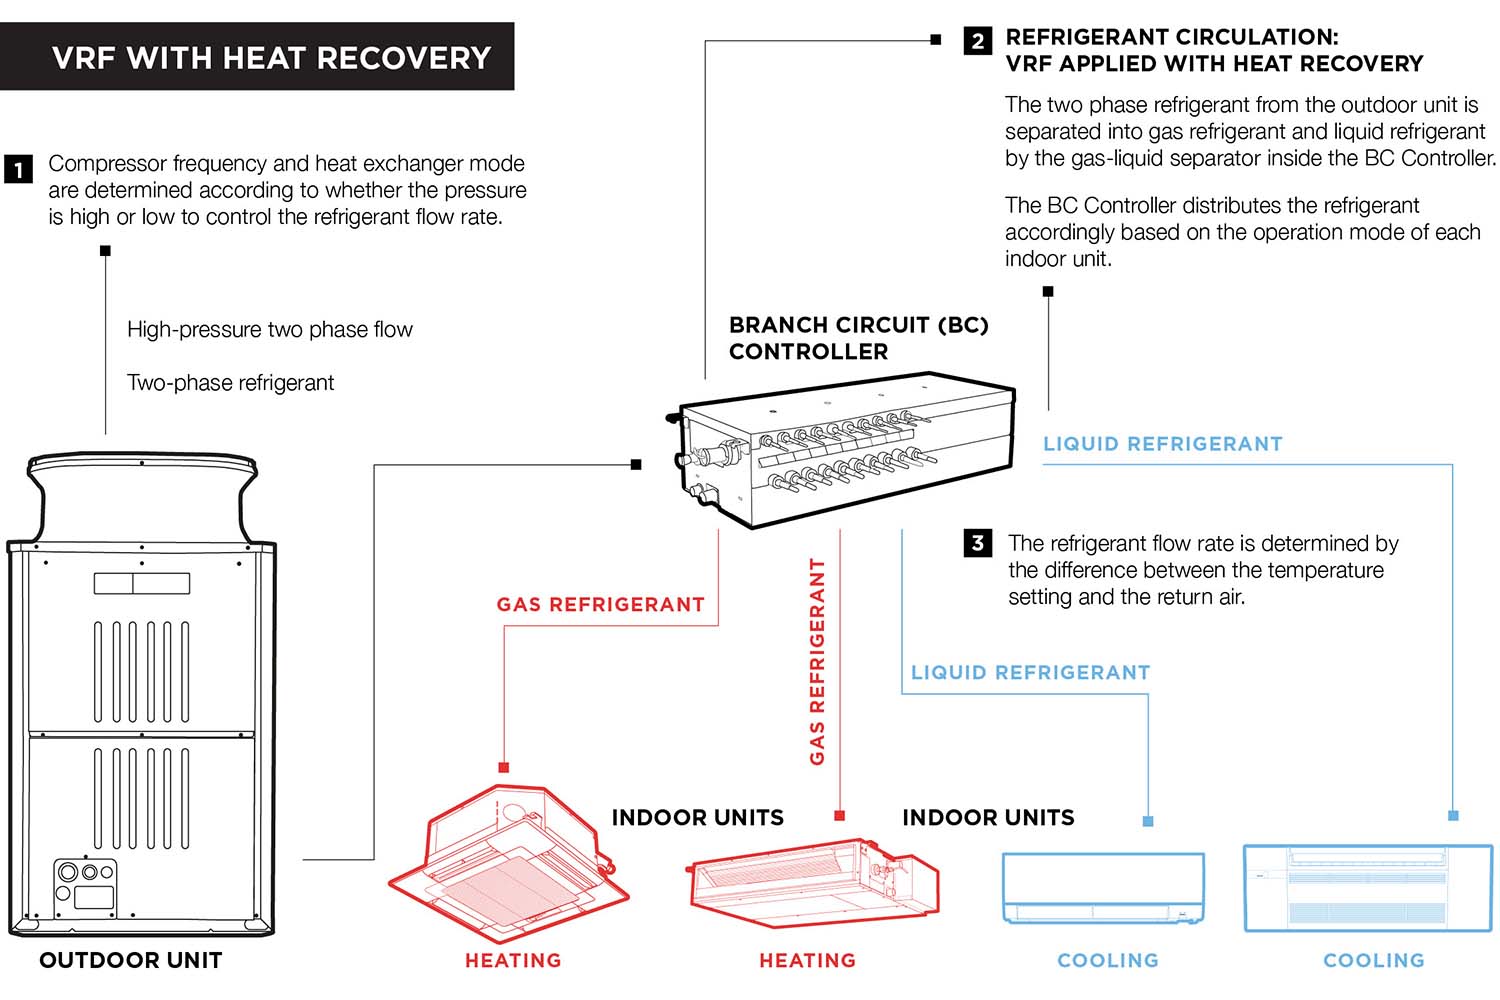 VRF with Heat Recovery Graphic.